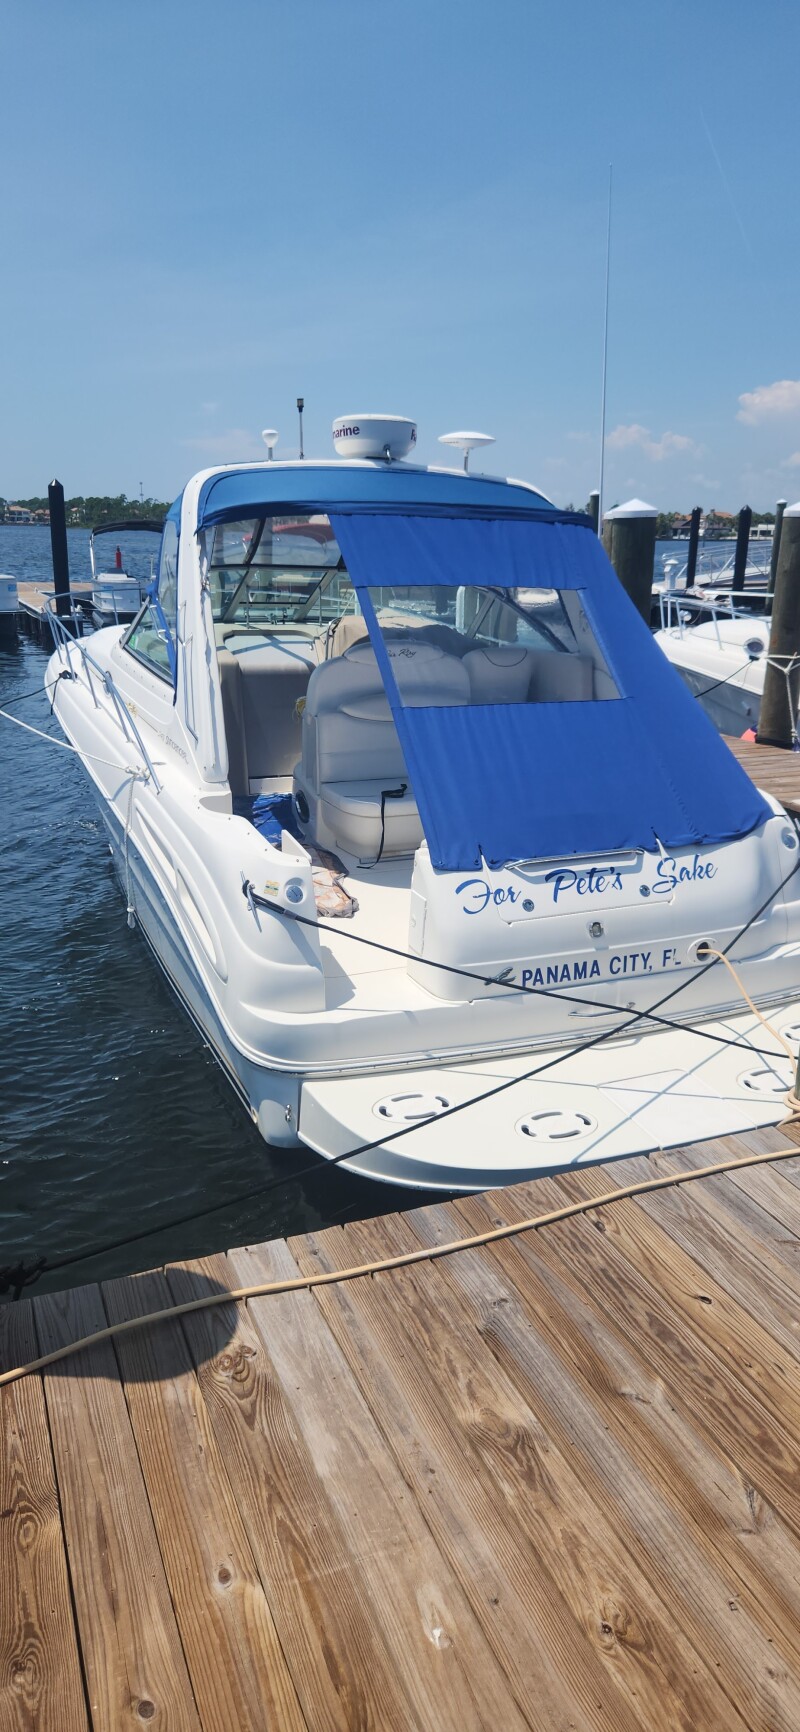 2000 Sea Ray 340 Power boat for sale in Lynn Haven, FL - image 4 